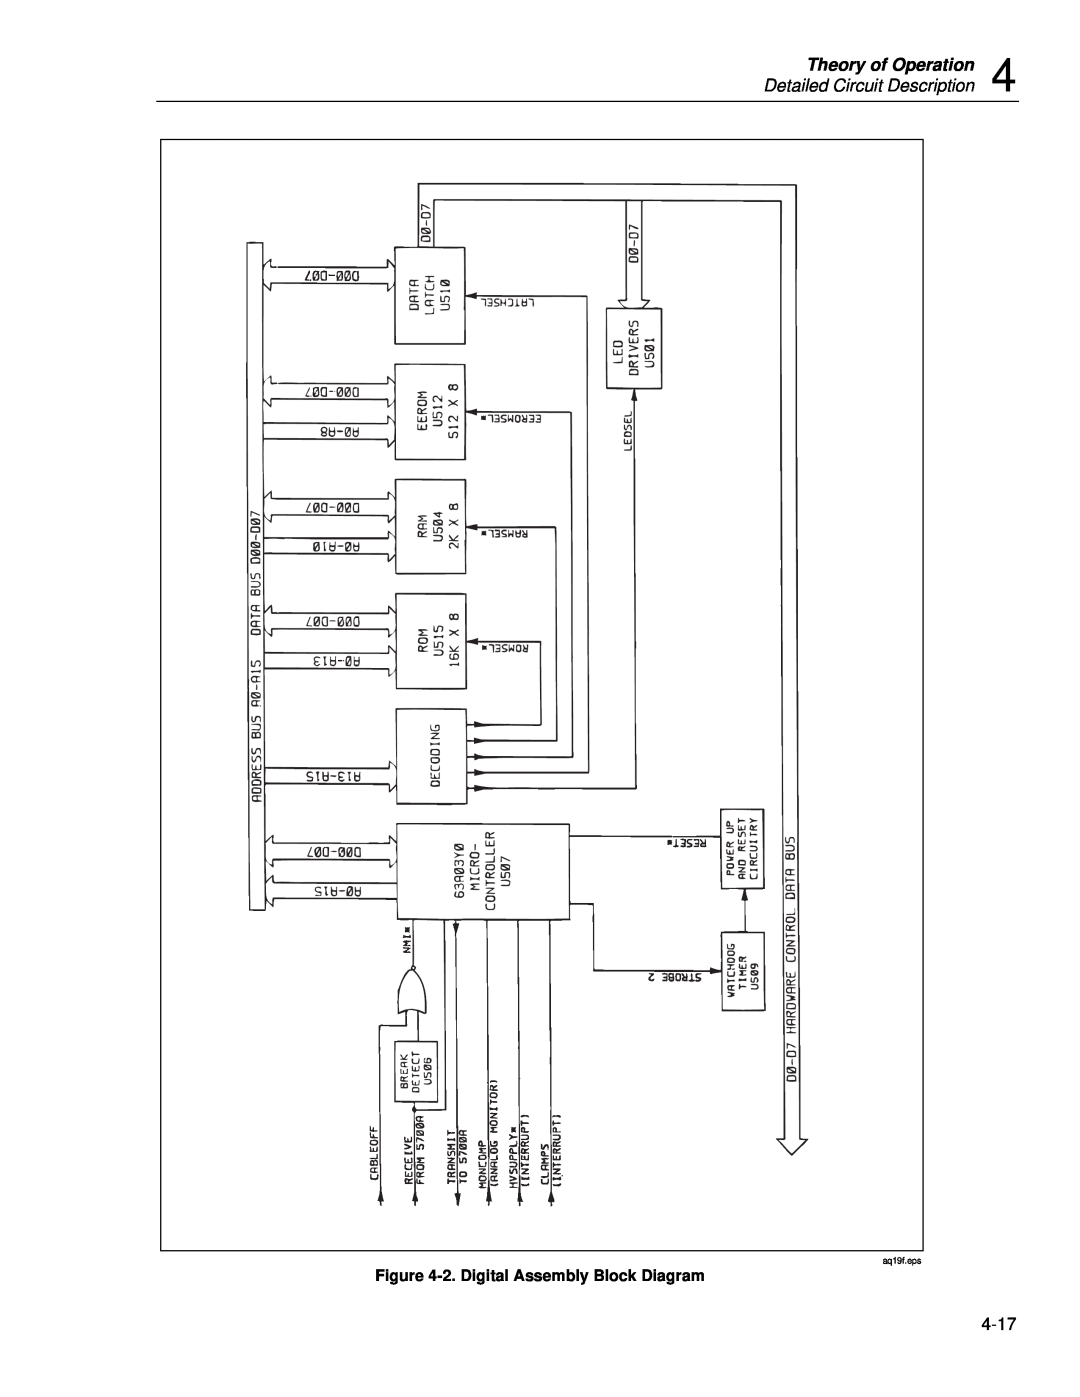 Fluke 5725A Theory of Operation, Detailed Circuit Description, 2.Digital Assembly Block Diagram, aq19f.eps 